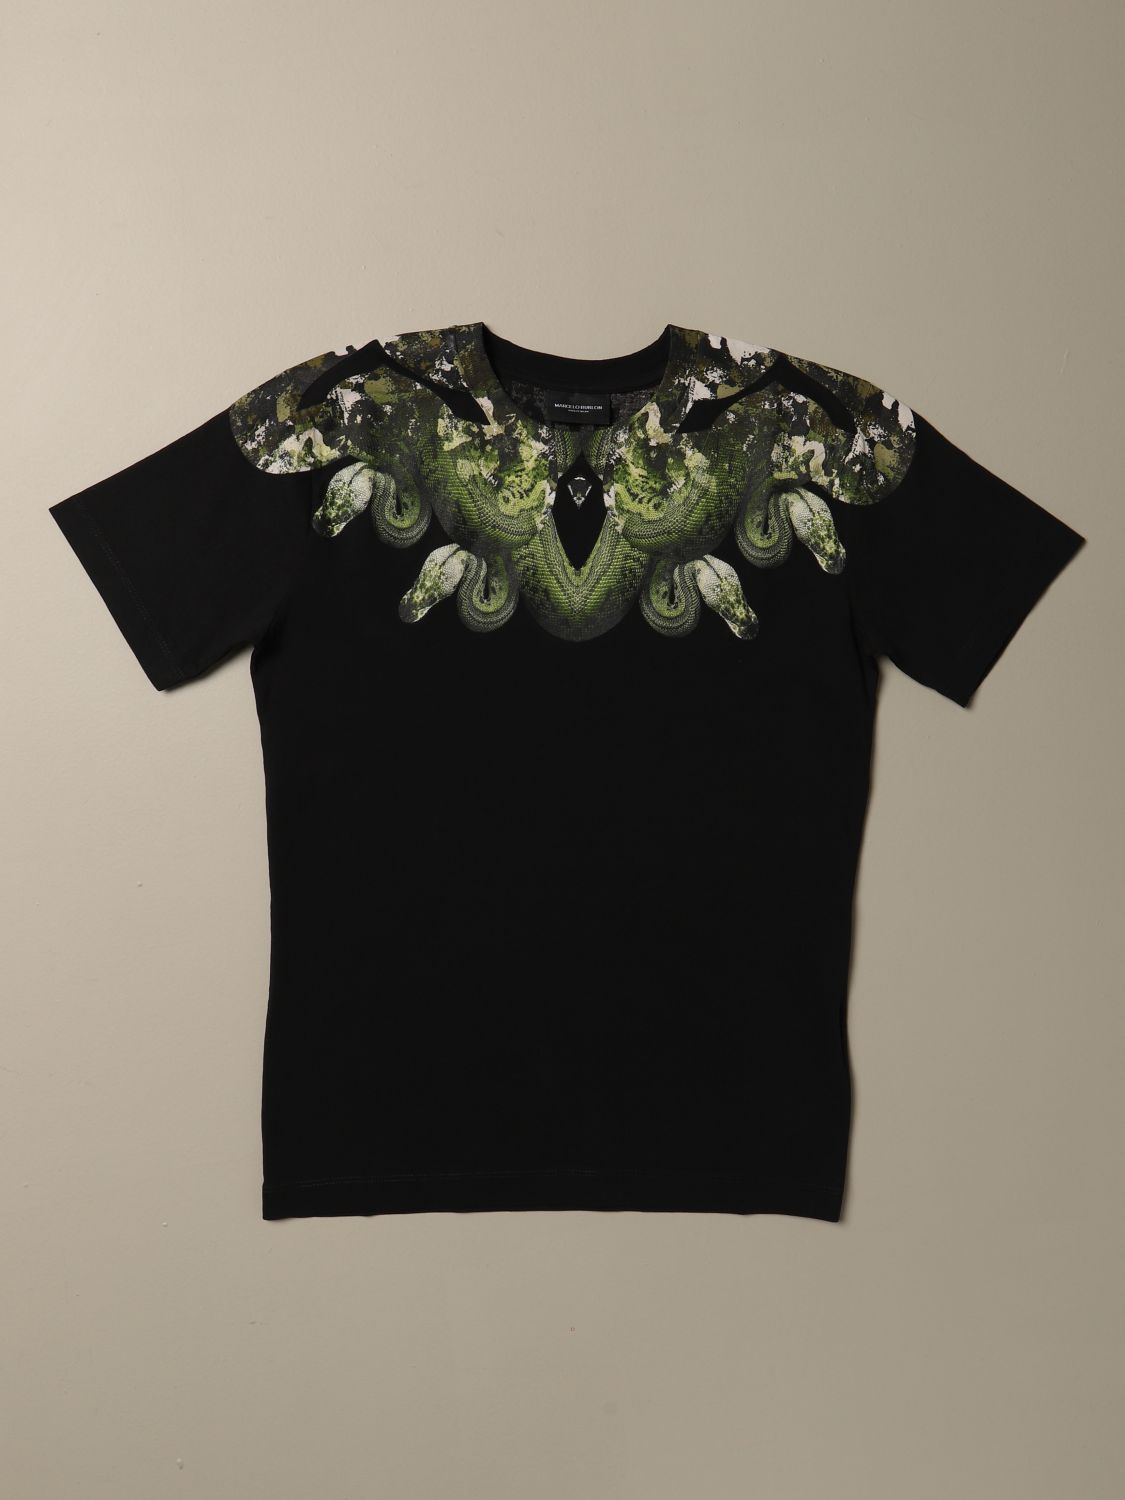 Marcelo Burlon Outlet: T-shirt with snake print - Black | Marcelo t- shirt 1116 0010 online at GIGLIO.COM